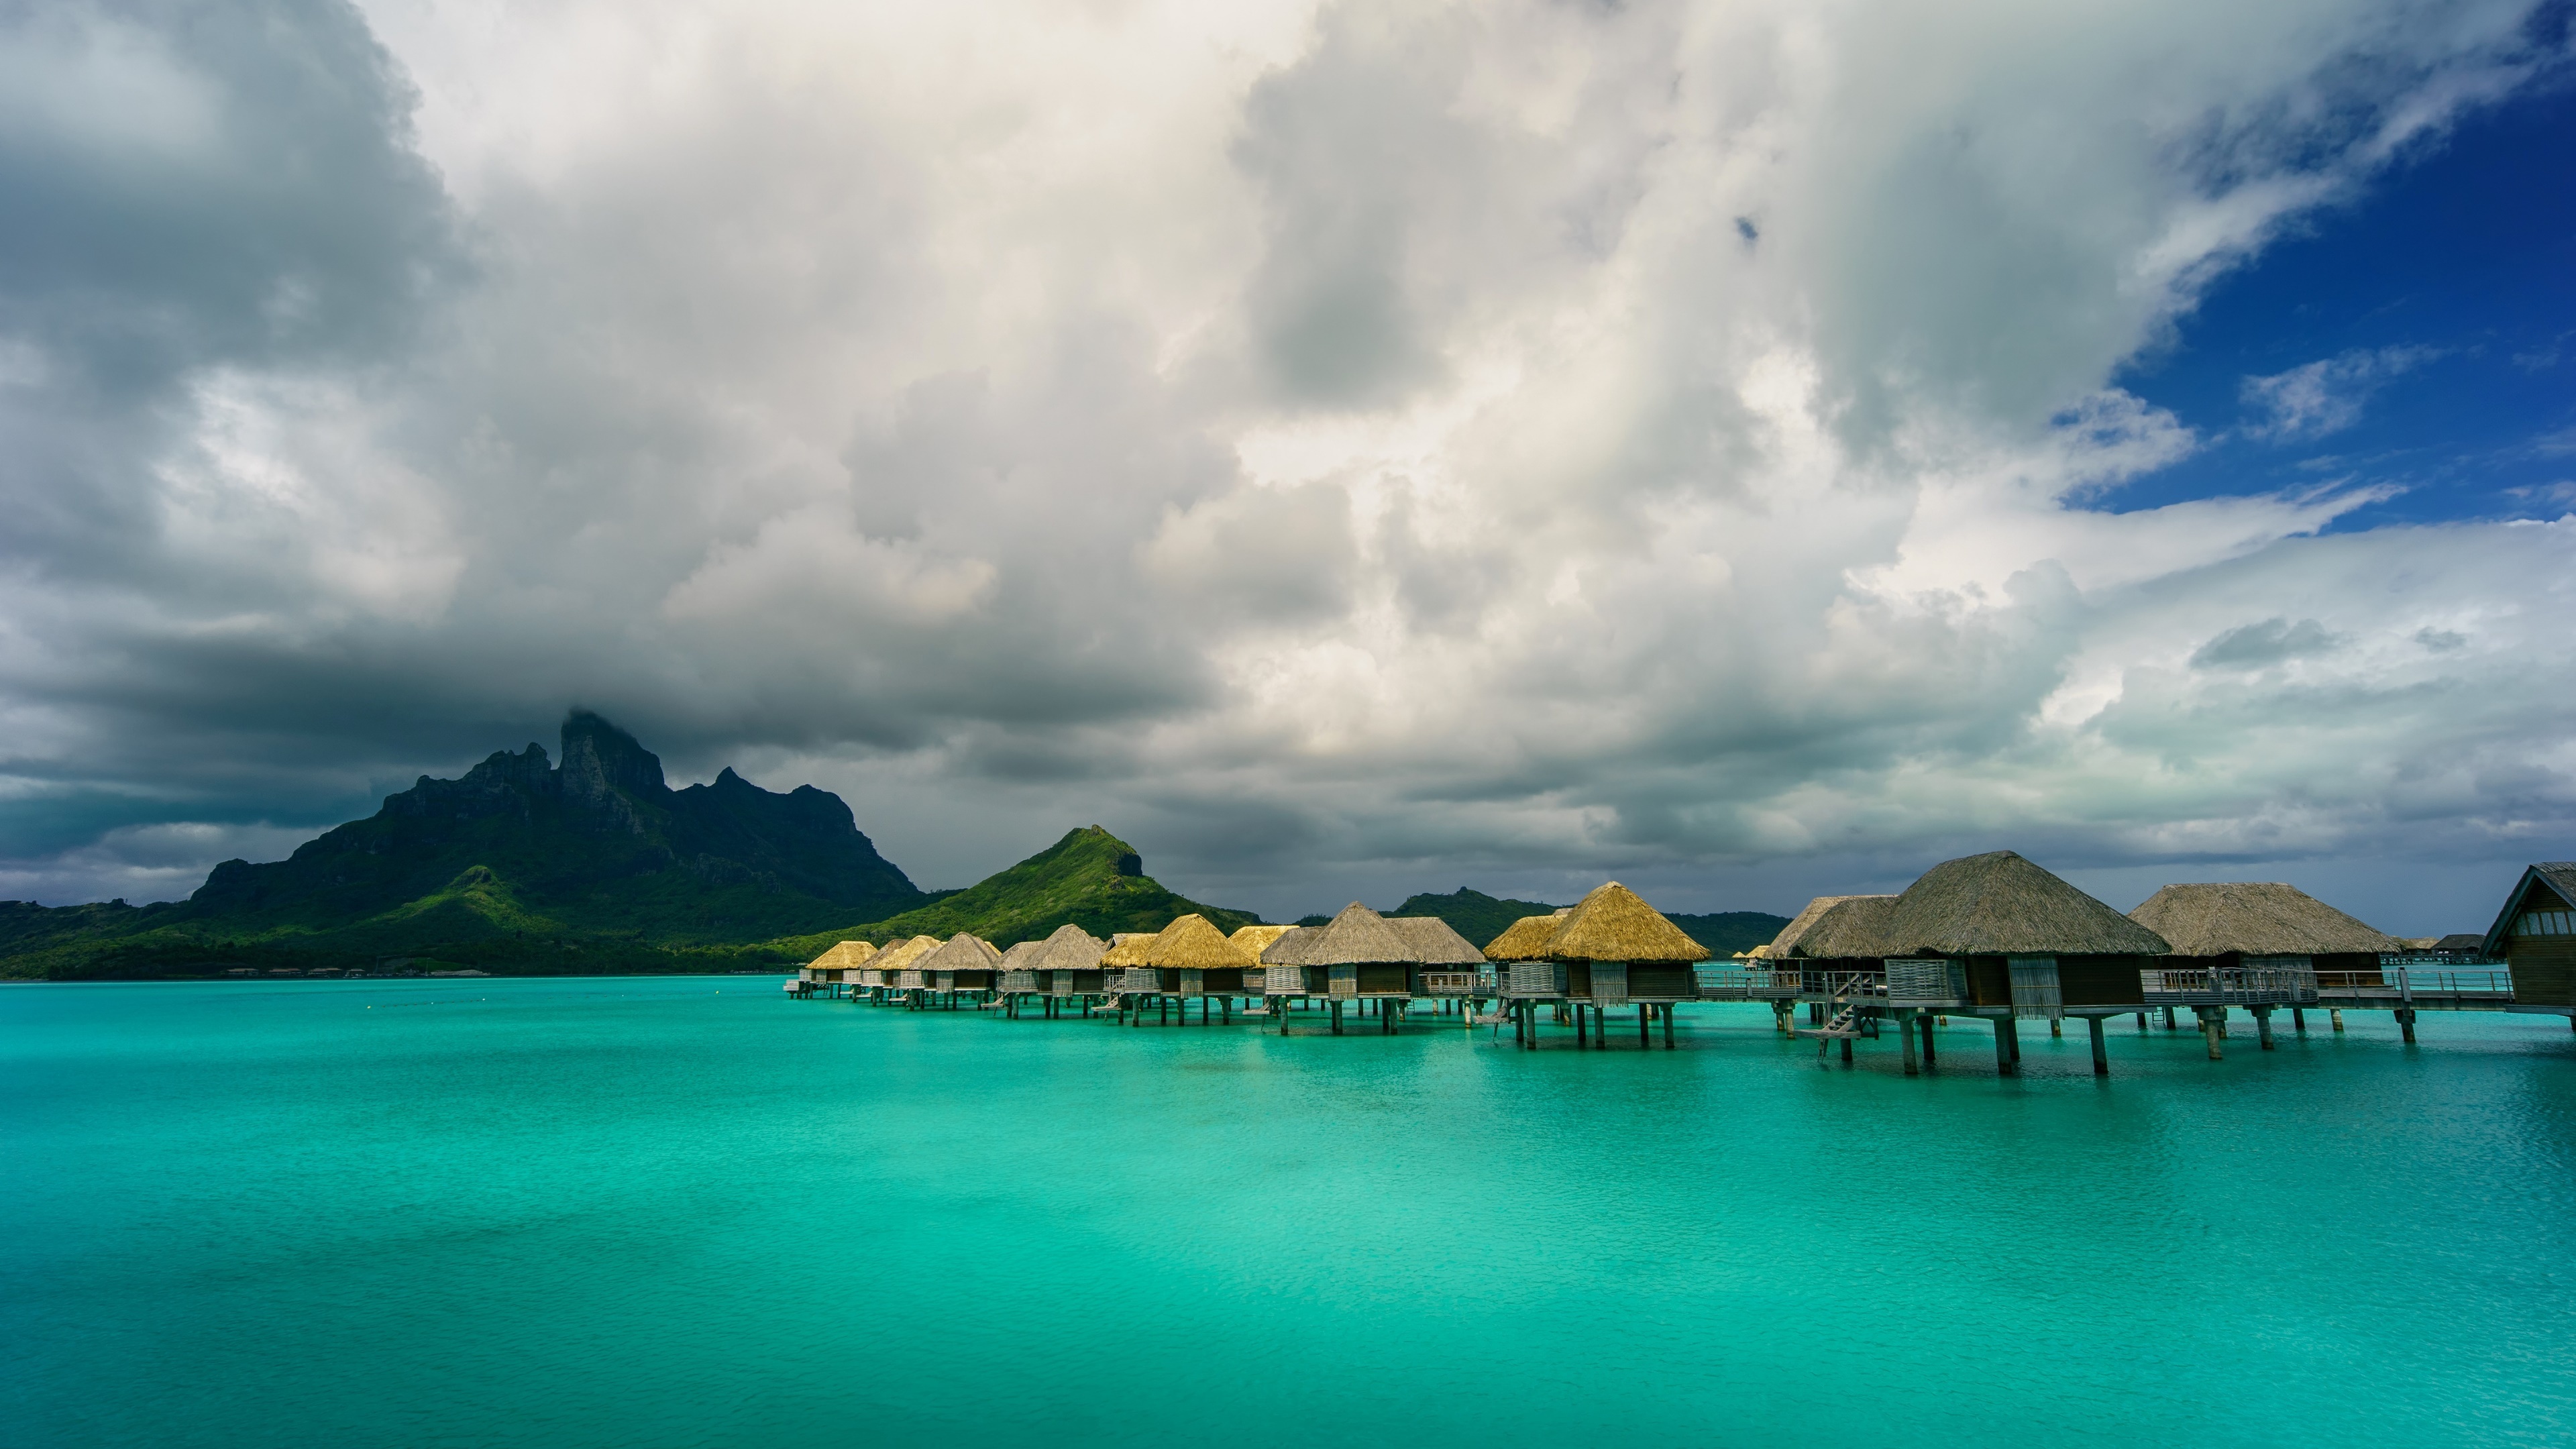 Bora Bora: World-famous for its vibrant turquoise lagoon, soft, white sandy stretches of beach and luxurious resorts. 3840x2160 4K Wallpaper.